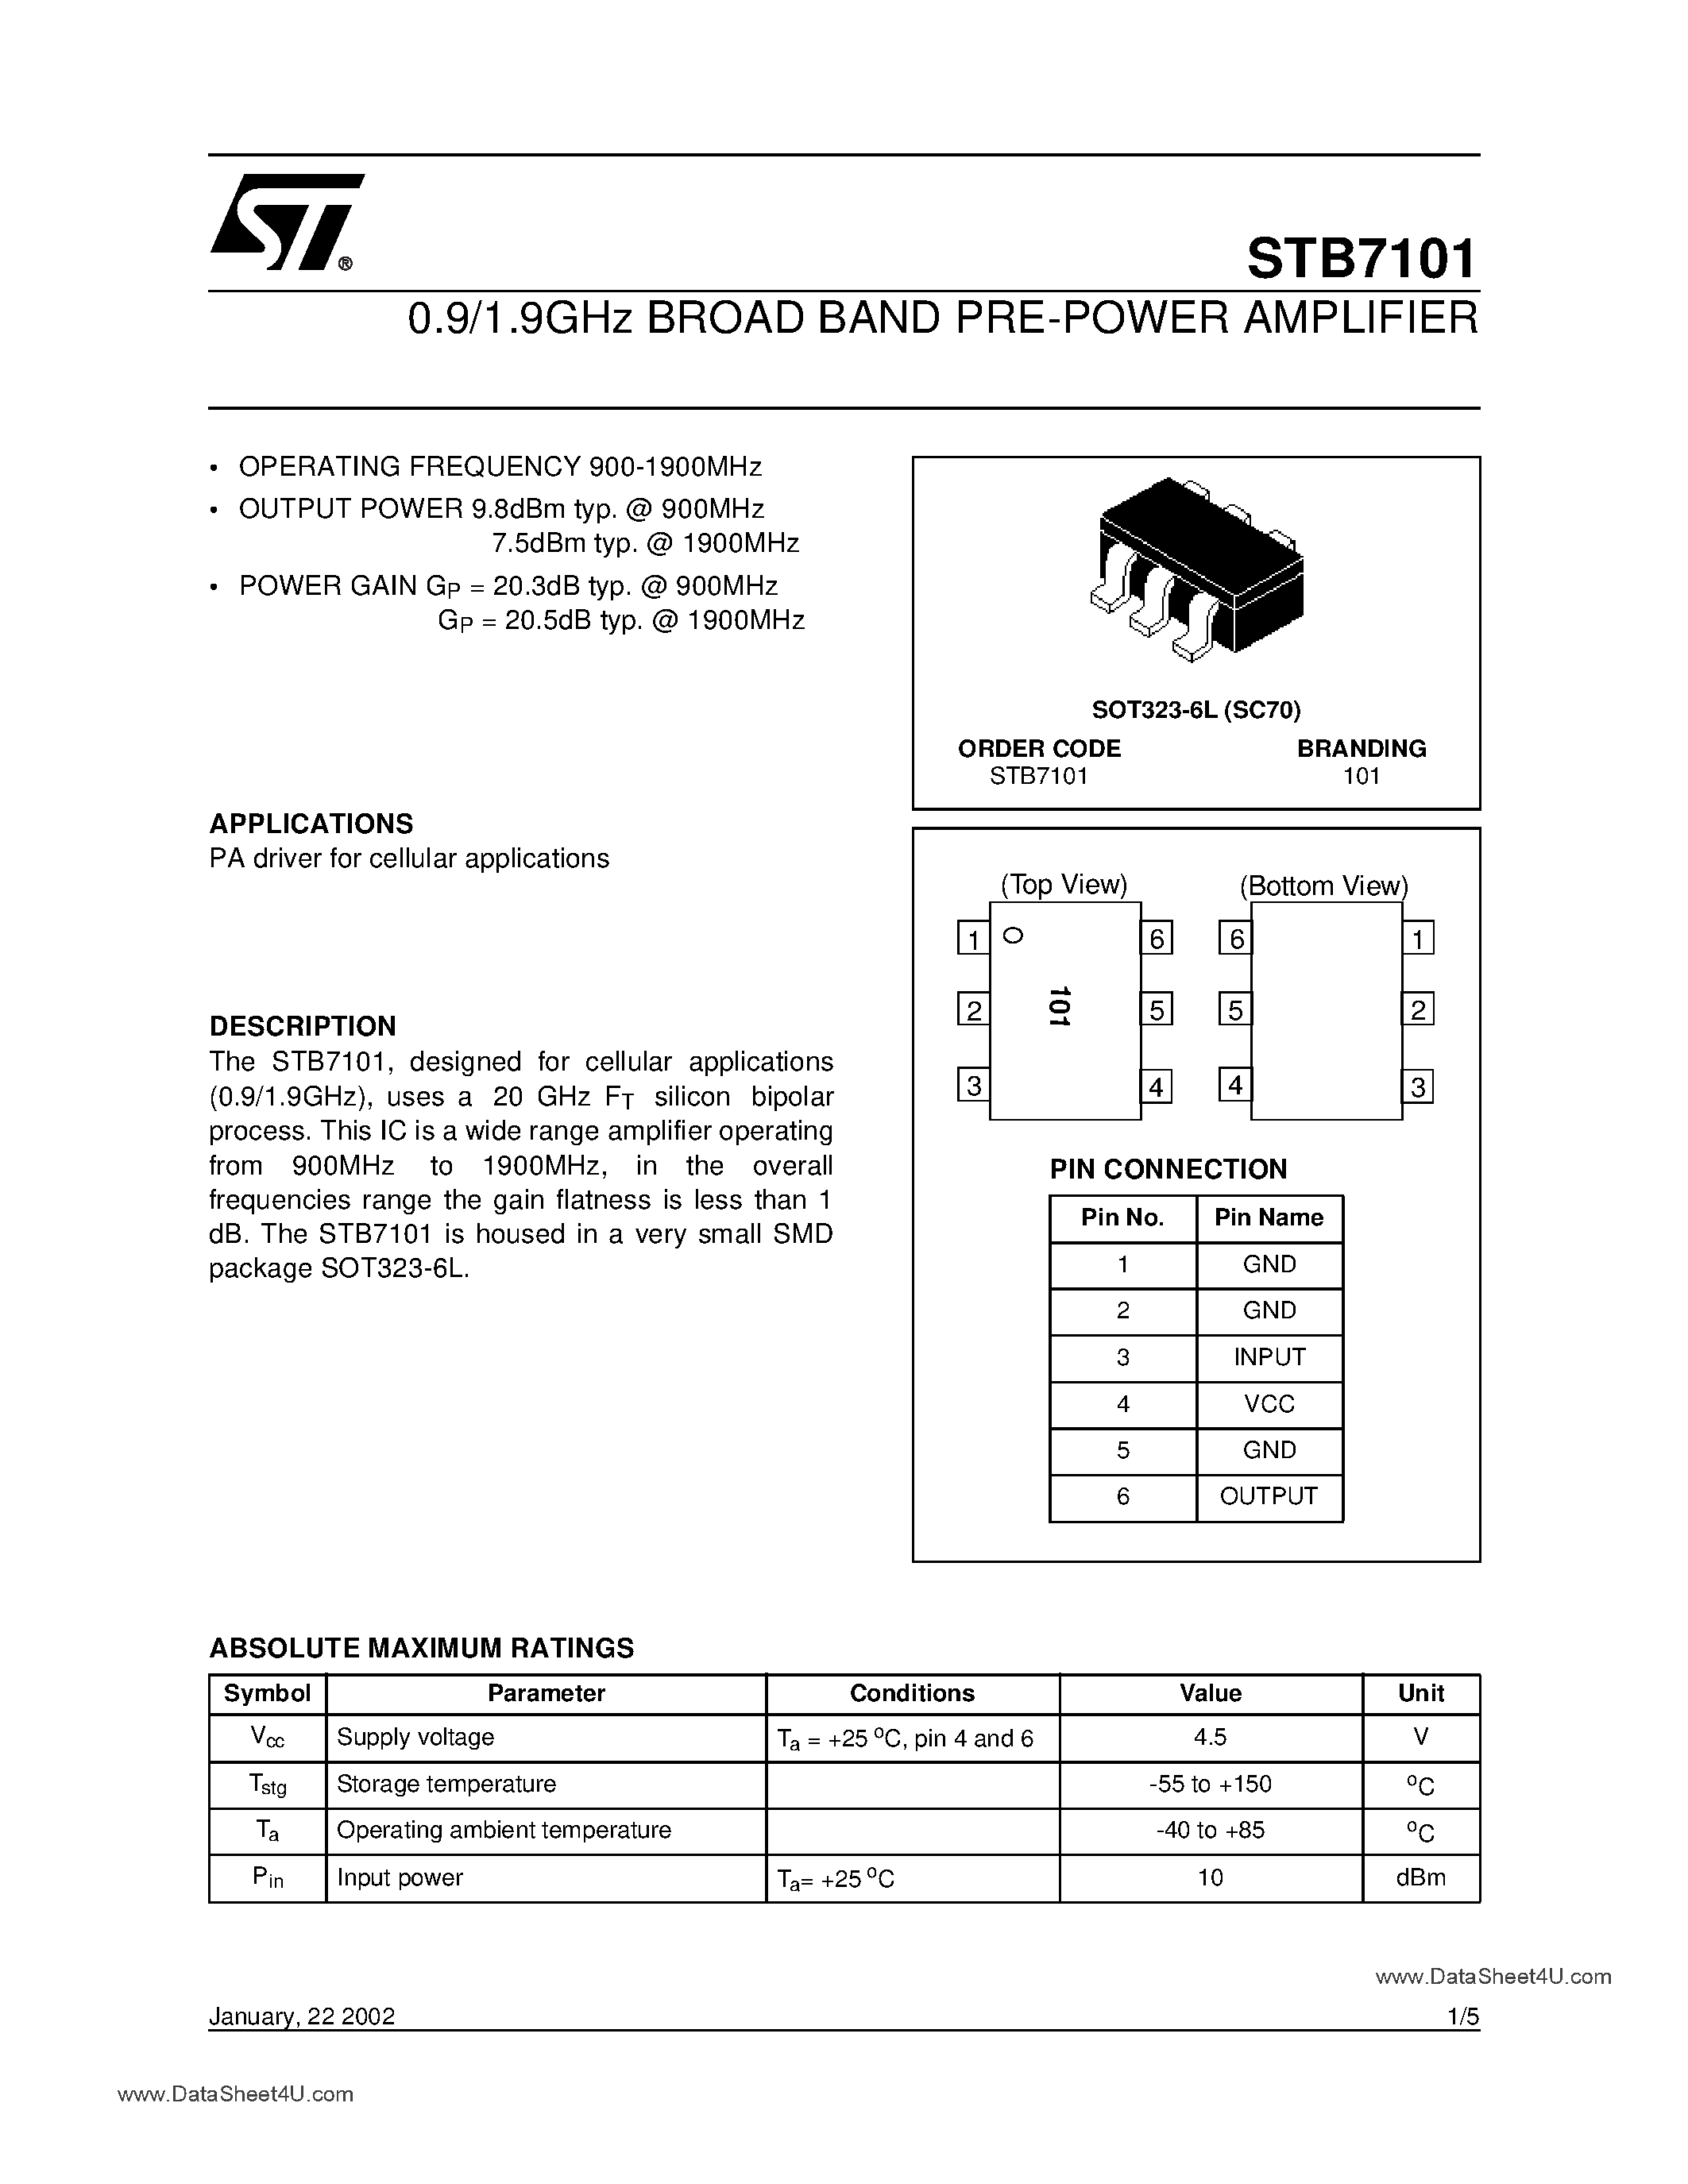 Datasheet STB7101 - 0.9/1.9GHz BROAD BAND PRE-POWER AMPLIFIER page 1